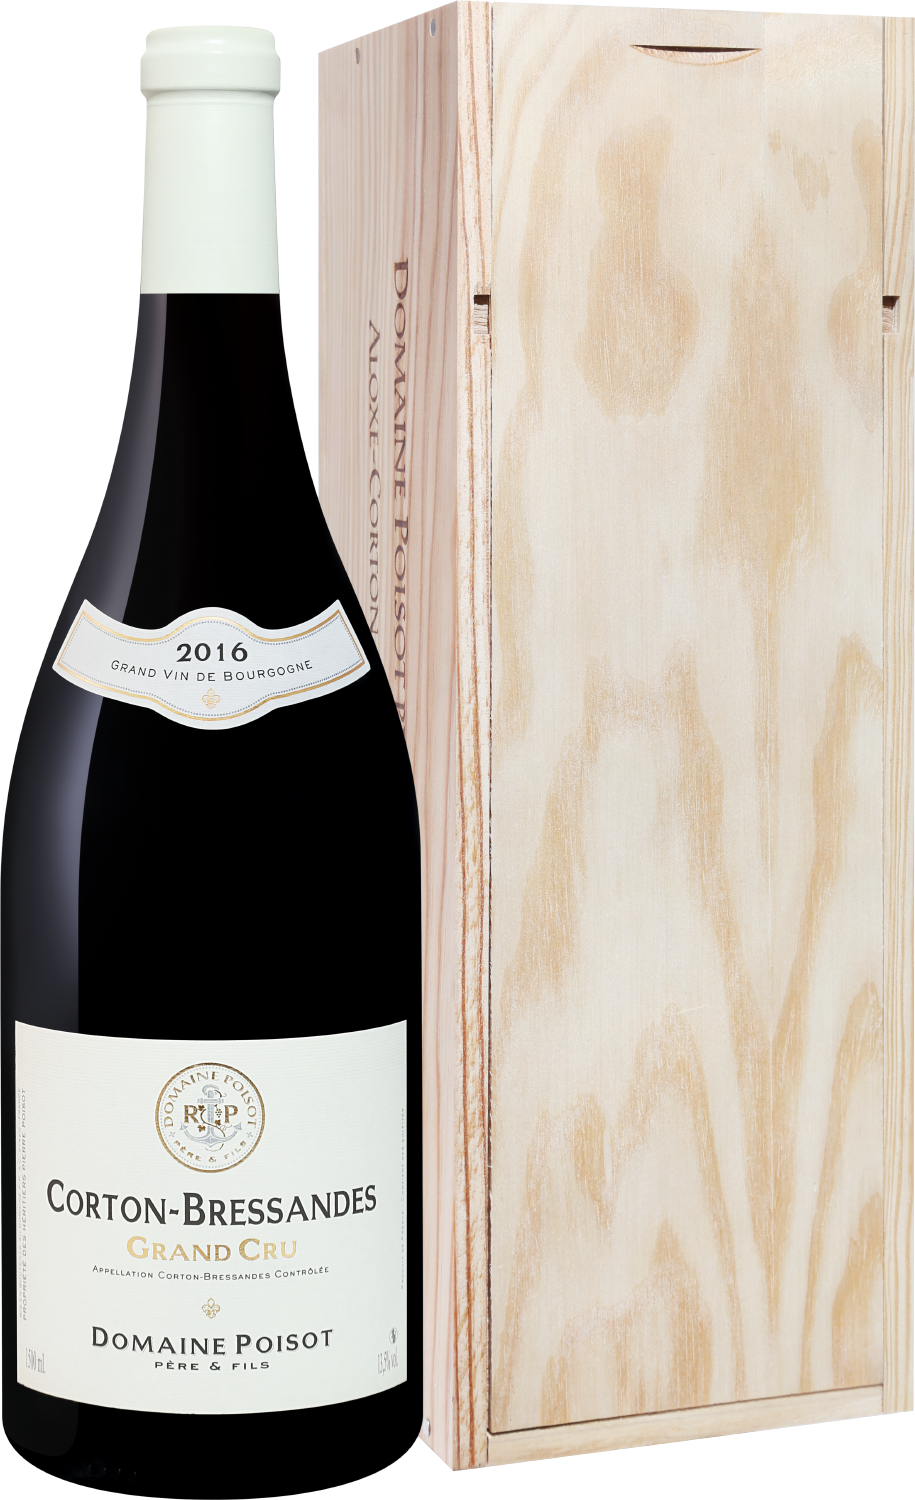 Corton-Bressandes Grand Cru AOC Domaine Poisot Pere and Fils (gift box) en caradeux pernand vergelesses 1er cru aoc domaine poisot pere and fils